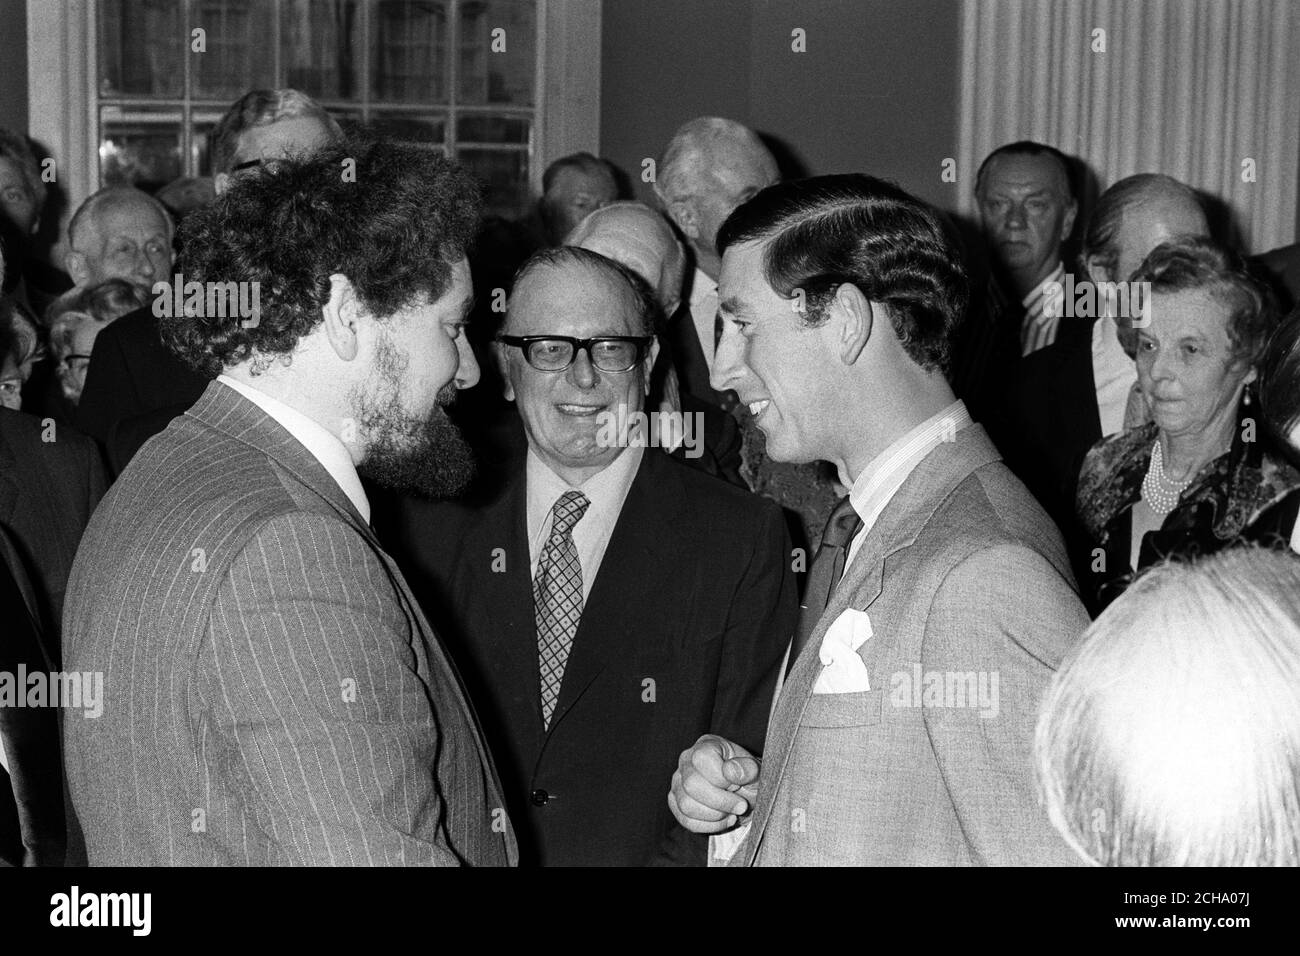 Prince Charles, the Prince of Wales, attends a reception in celebration of the 25th anniversary of the founding of the British Atlantic Committee and the 30th anniversary of the North Atlantic Alliance at the Banqueting Hall, Whitehall, London. (L-R) The Prince of Wales congratulates Robert Hutchinson (l), Defence correspondent of the Press Association who was awarded a prize for two articles on NATO, and Erik de Mauny (centre, with glasses), who made four documentaries entitled 'The Great Divide' on Radio 4. Stock Photo